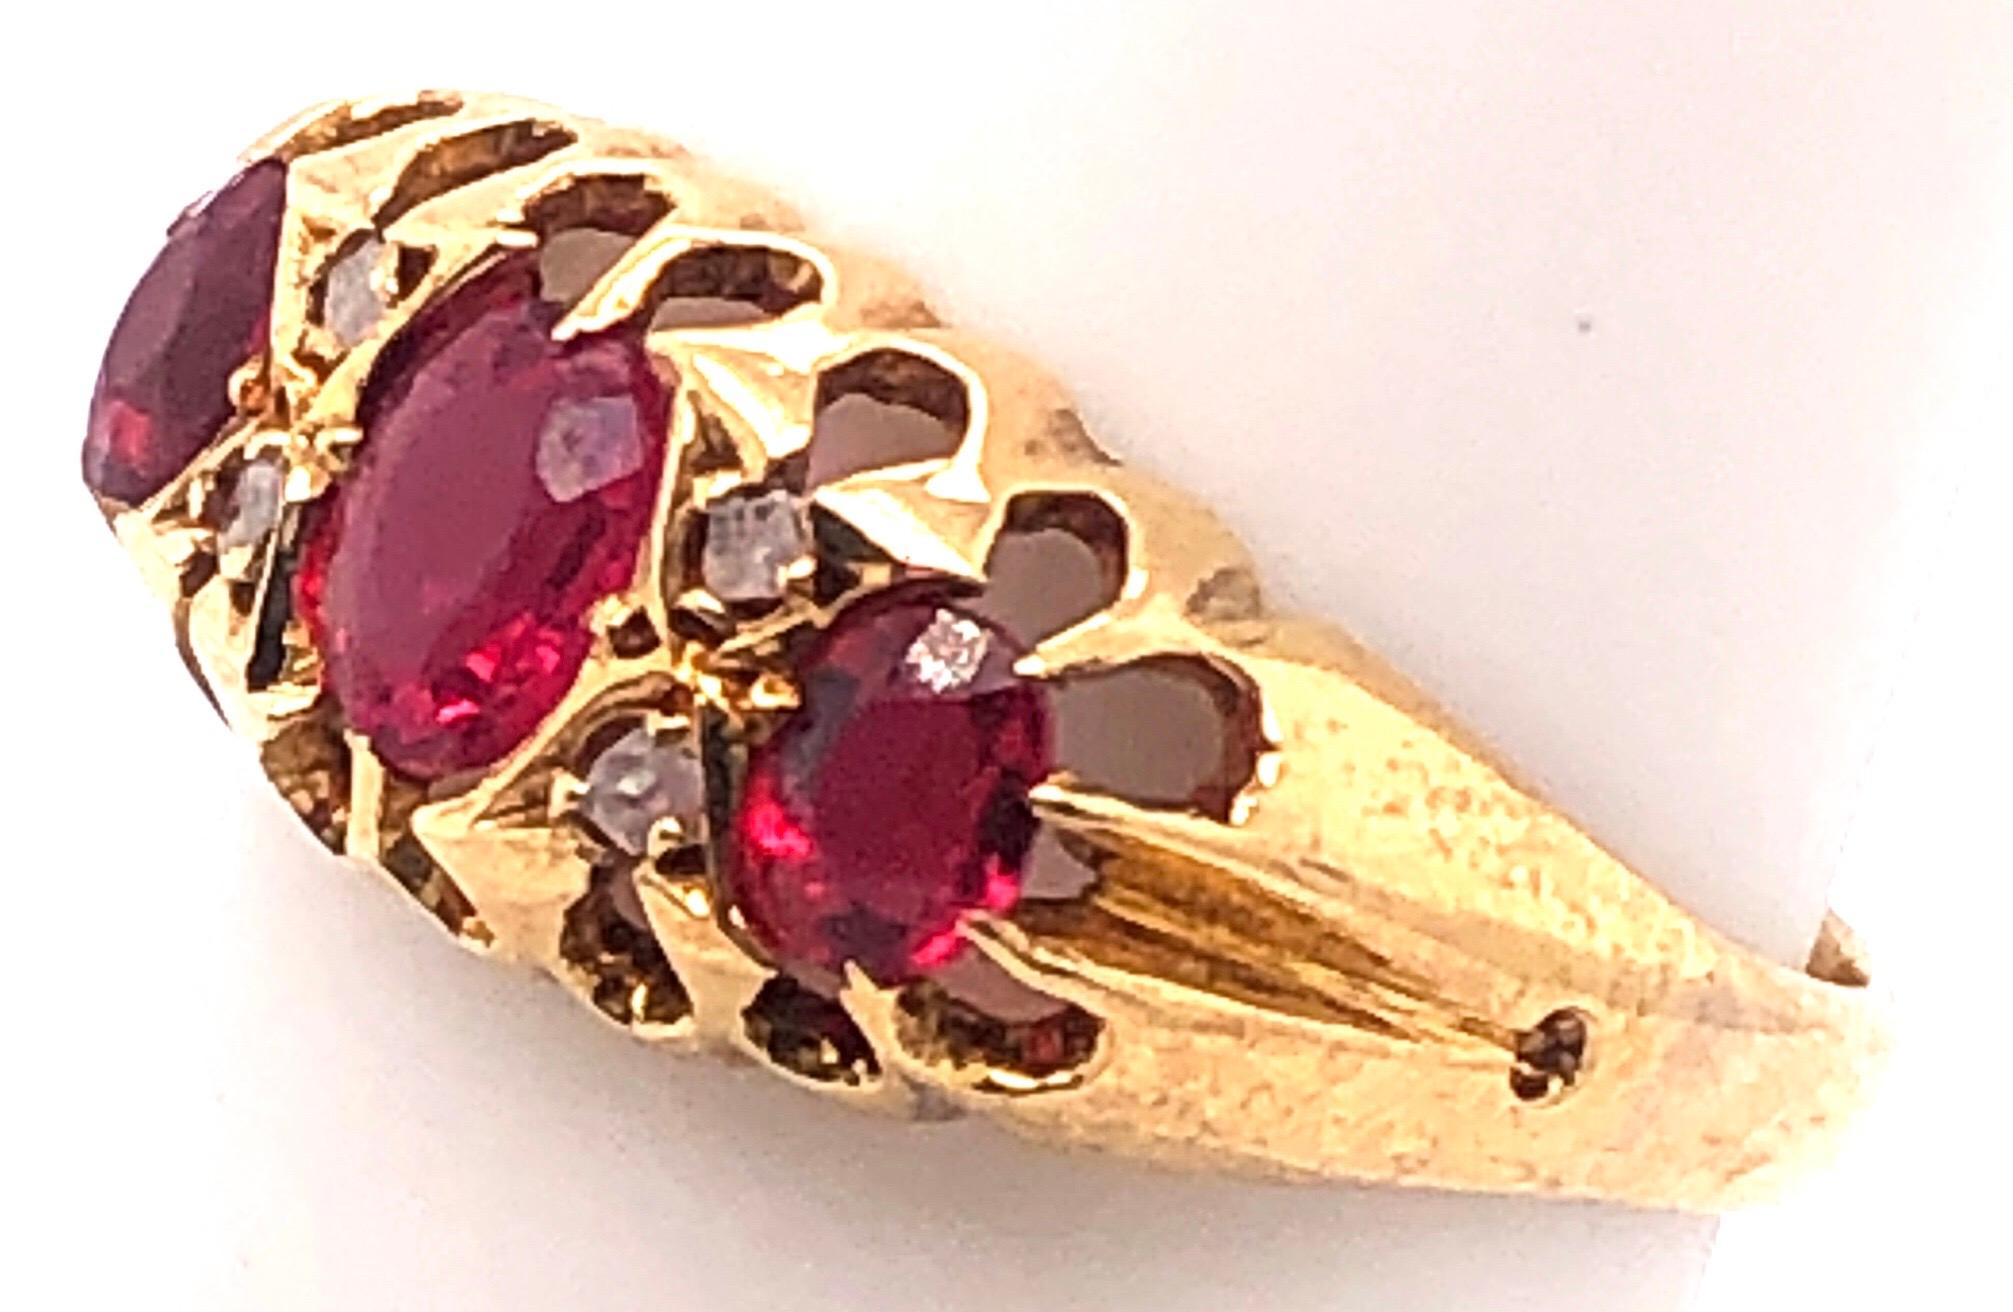 18 Karat Yellow Gold Three Stone Ruby Ring With Diamond Accents
0.04 total diamond weight.
Size 5.5
2.94 grams total weight.